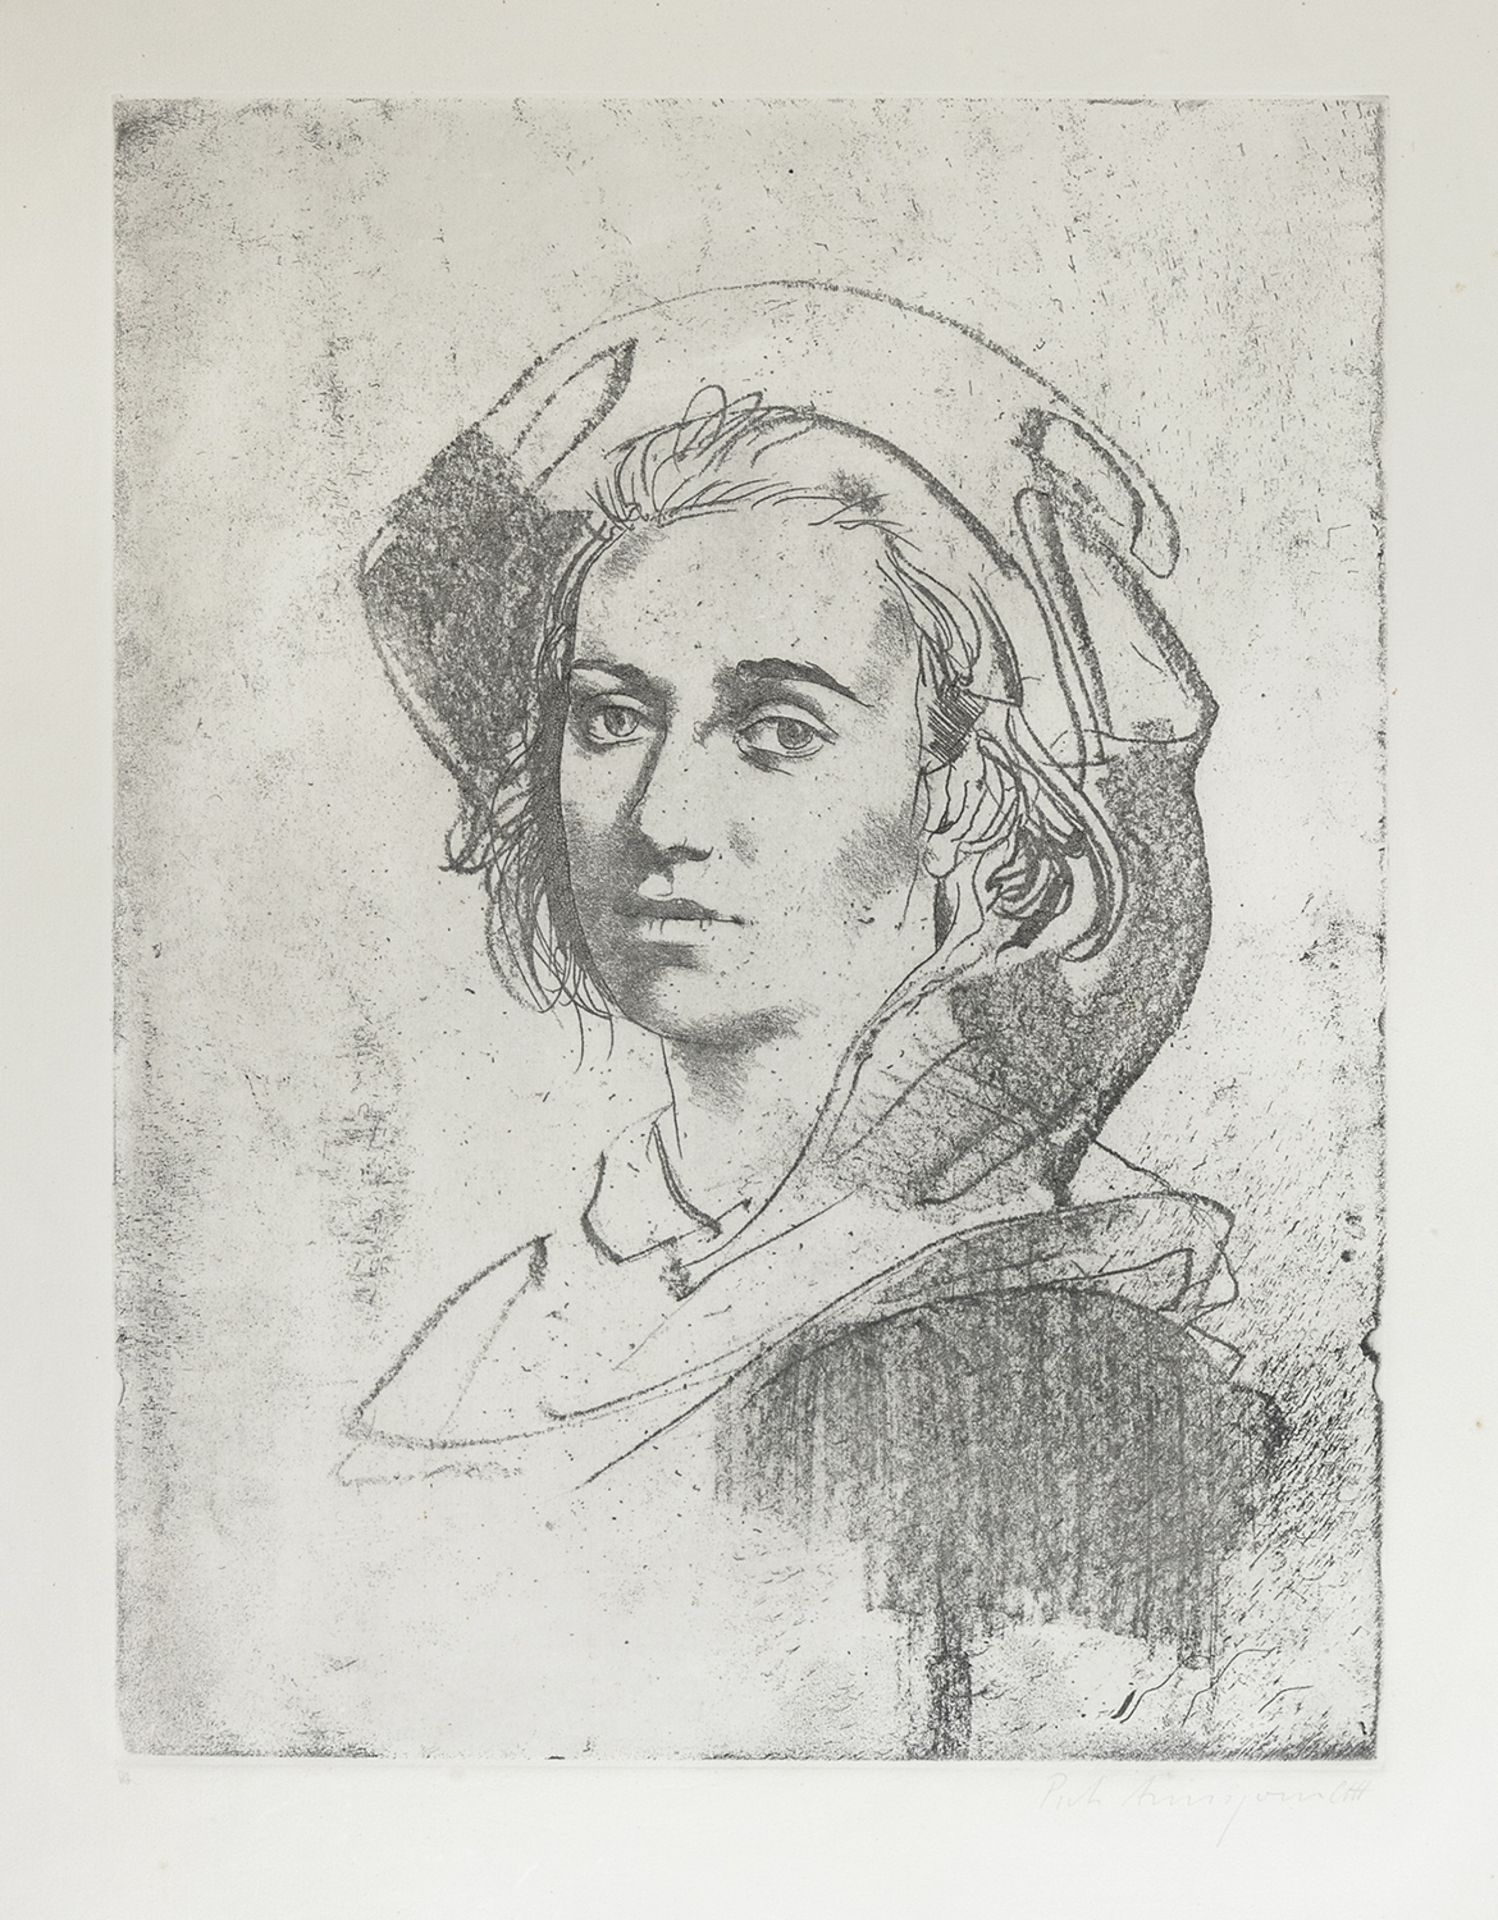 ETCHING OF A WOMAN BY PIETRO ANNIGONI